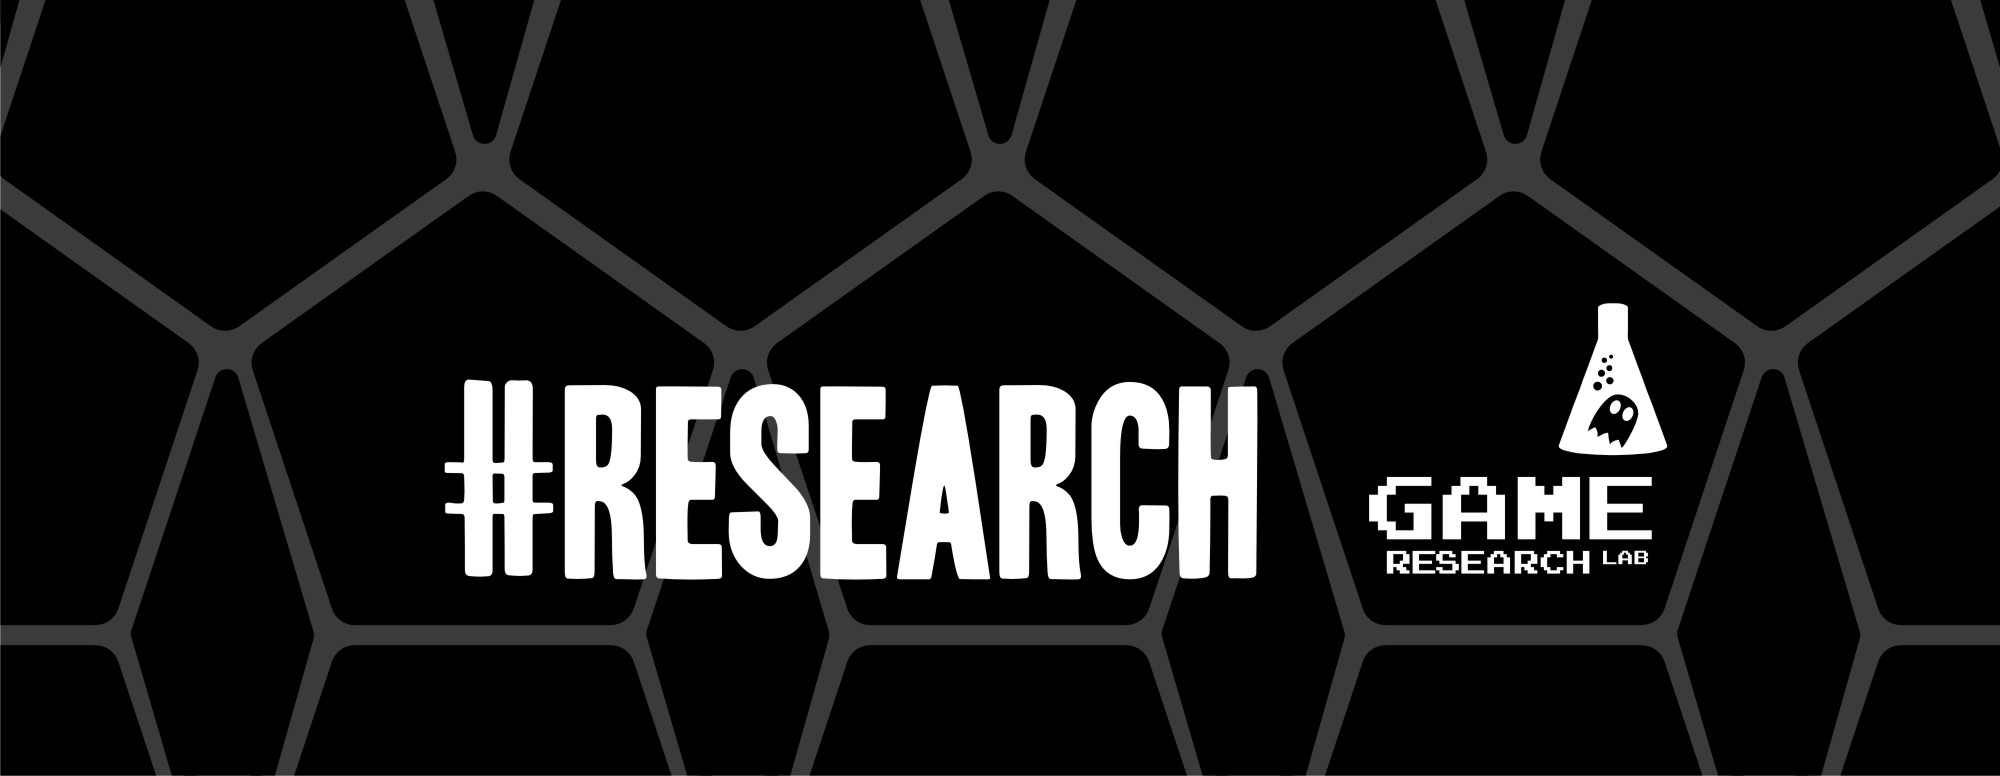 Mindtrek 2016 research papers